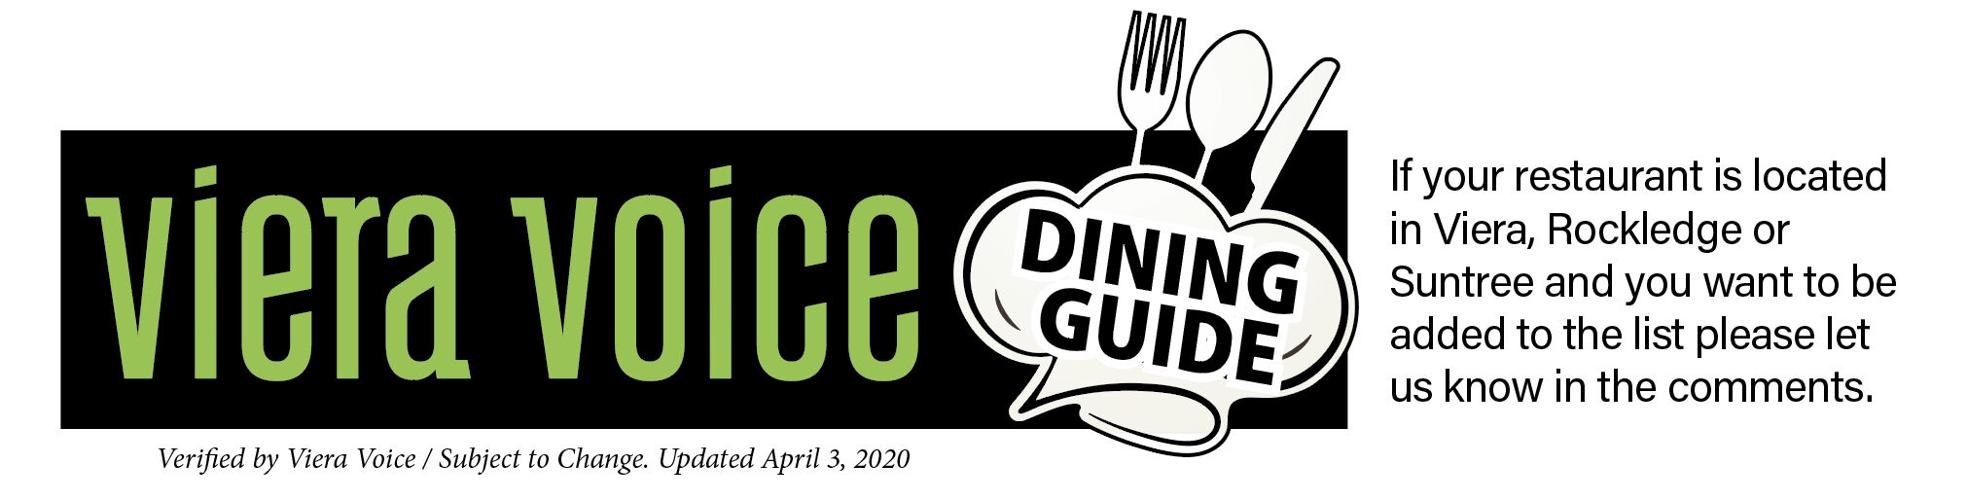 Viera Voice Dining Guide